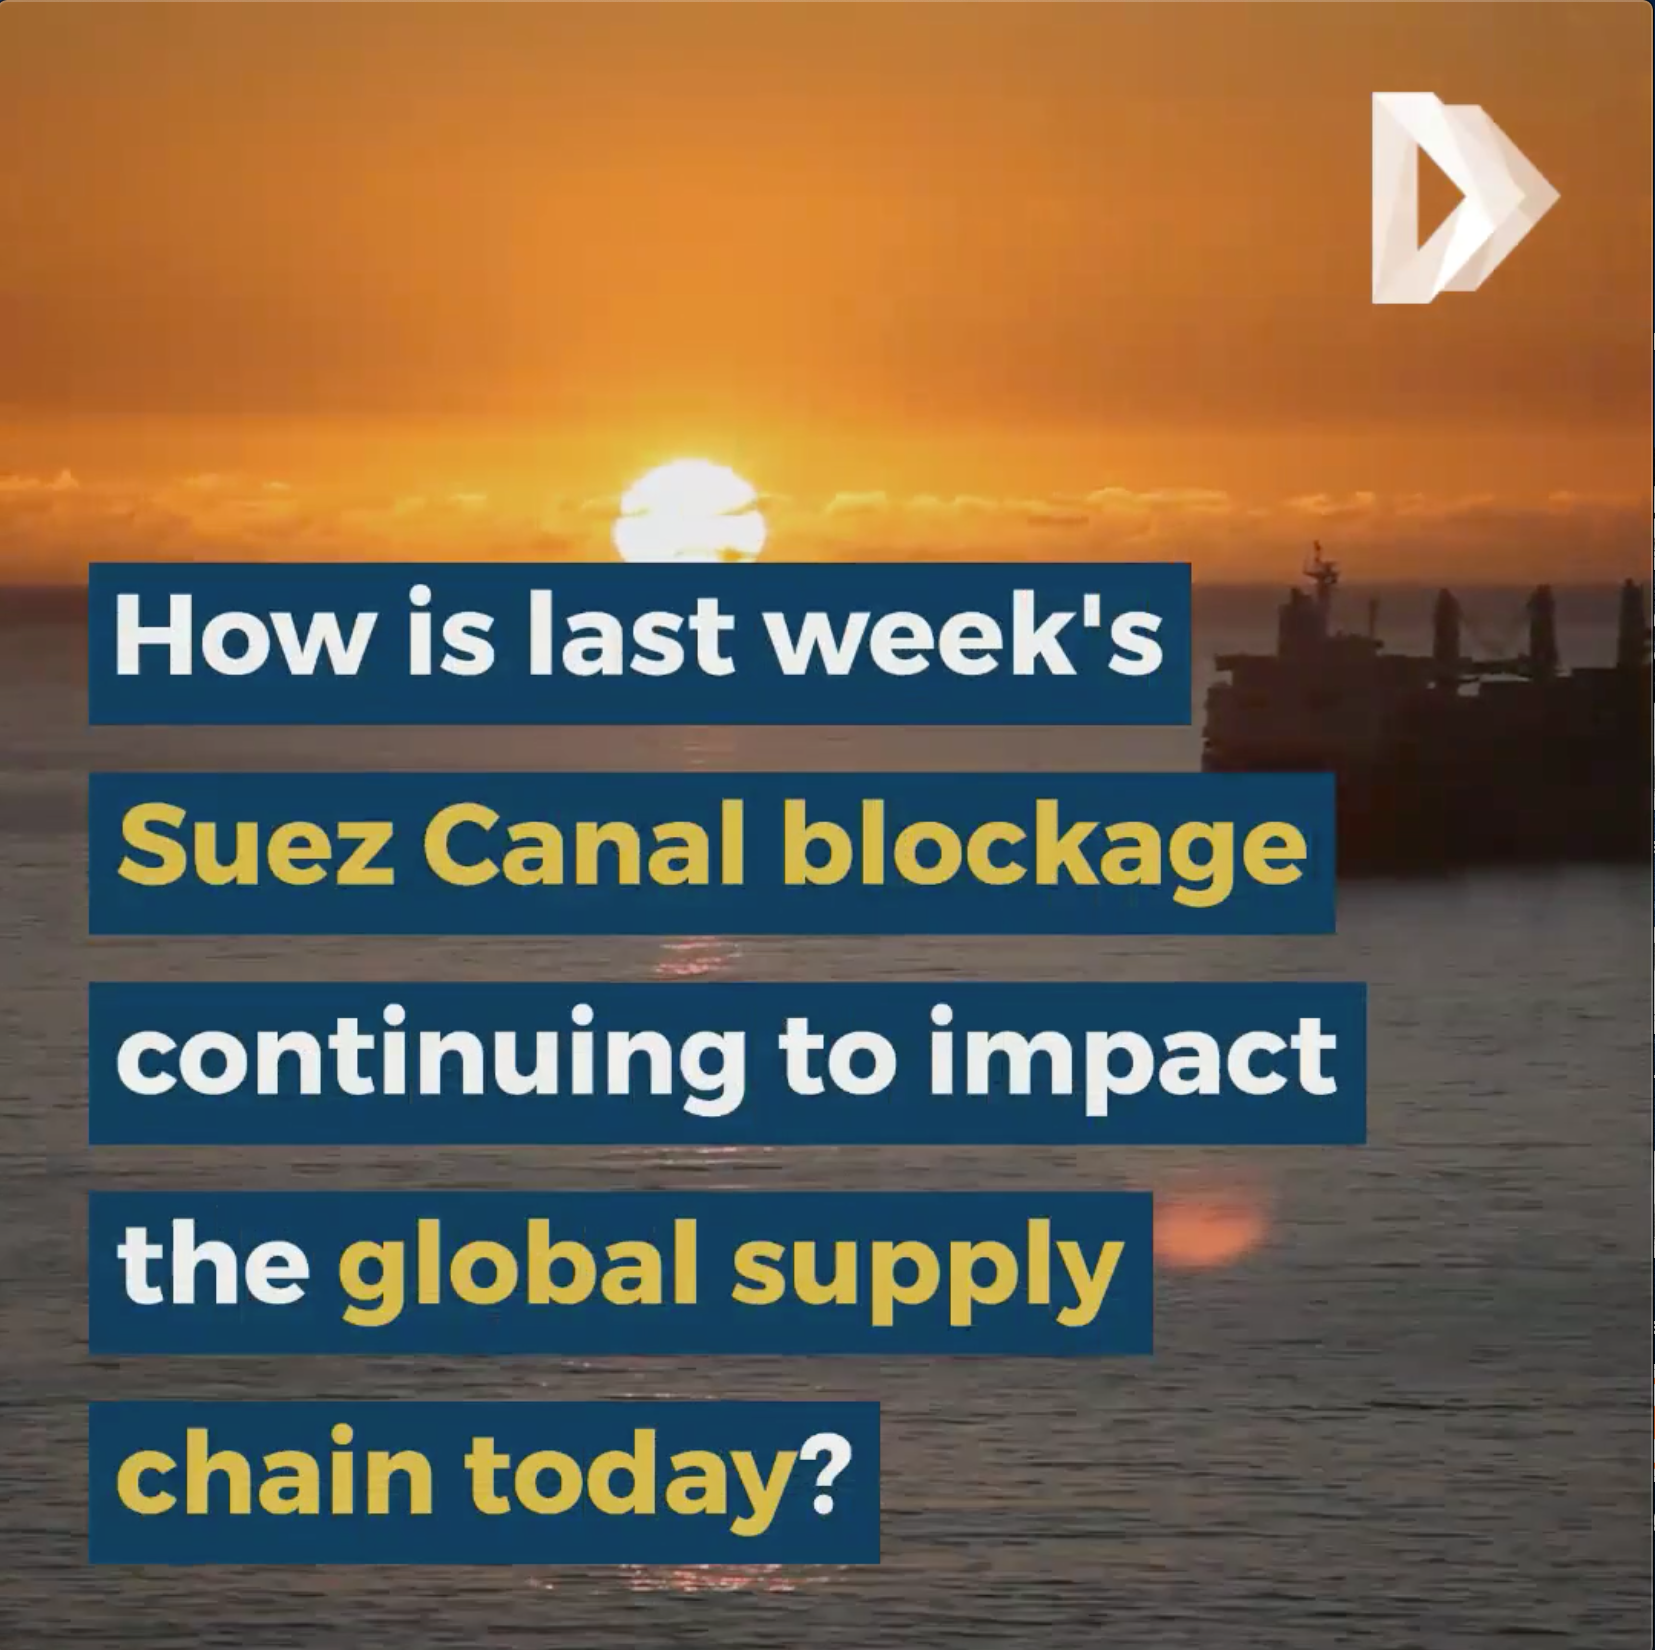 Suez Canal Blockage & Its Impact on the Global Supply Chain